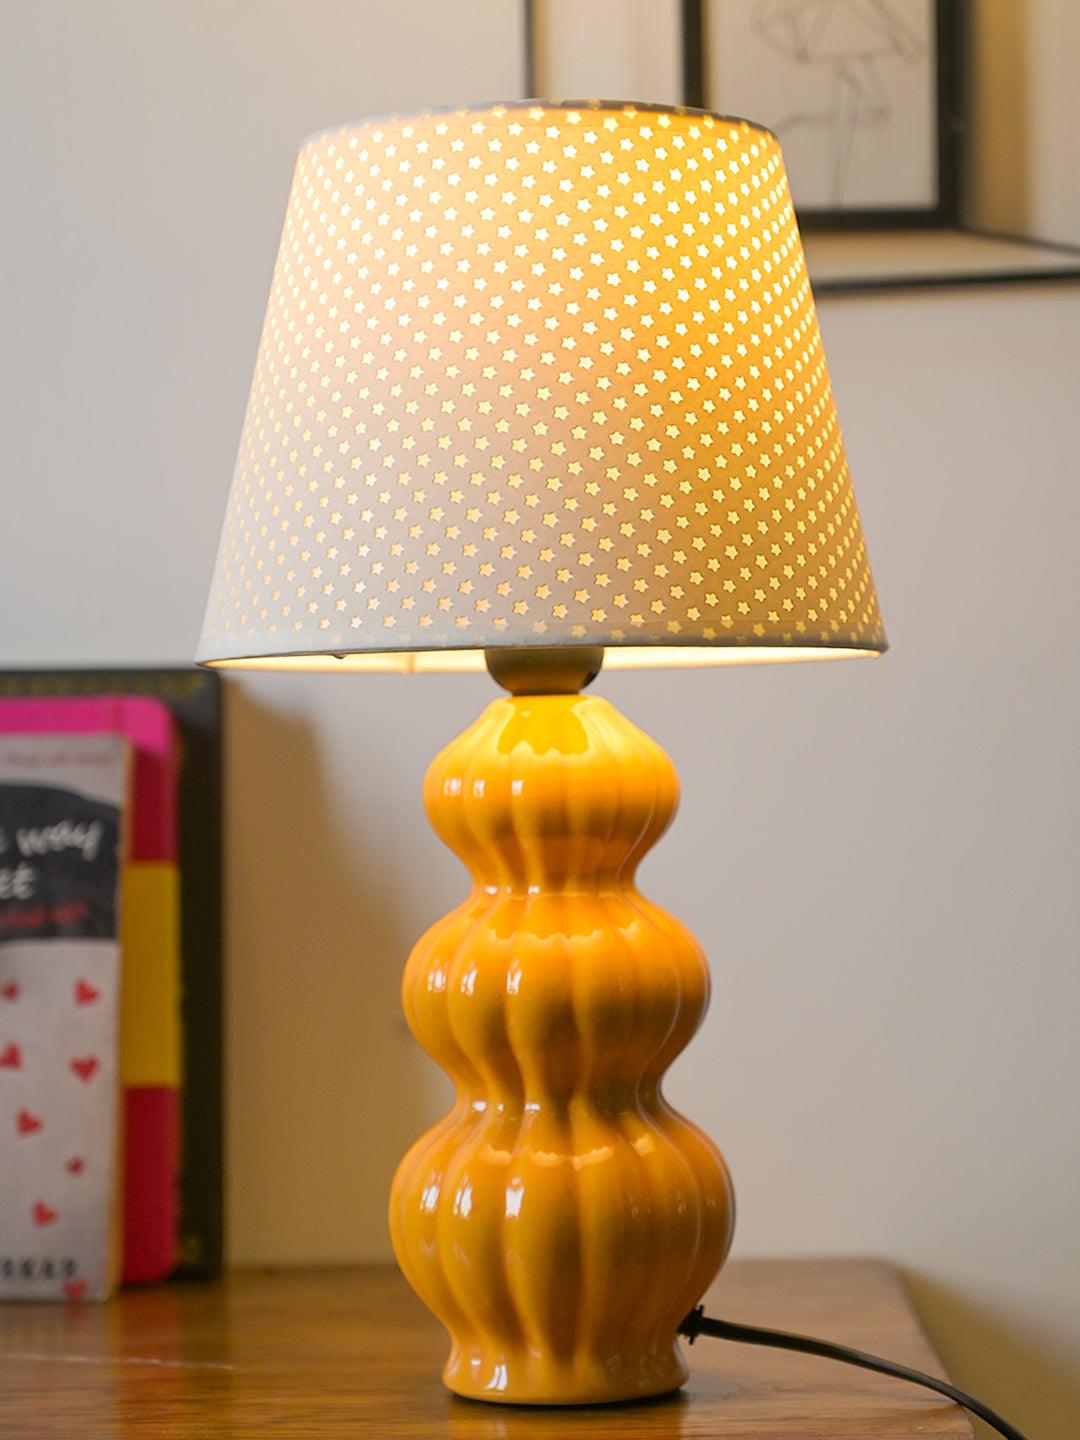 Stylish Mustard Color Table Lamp